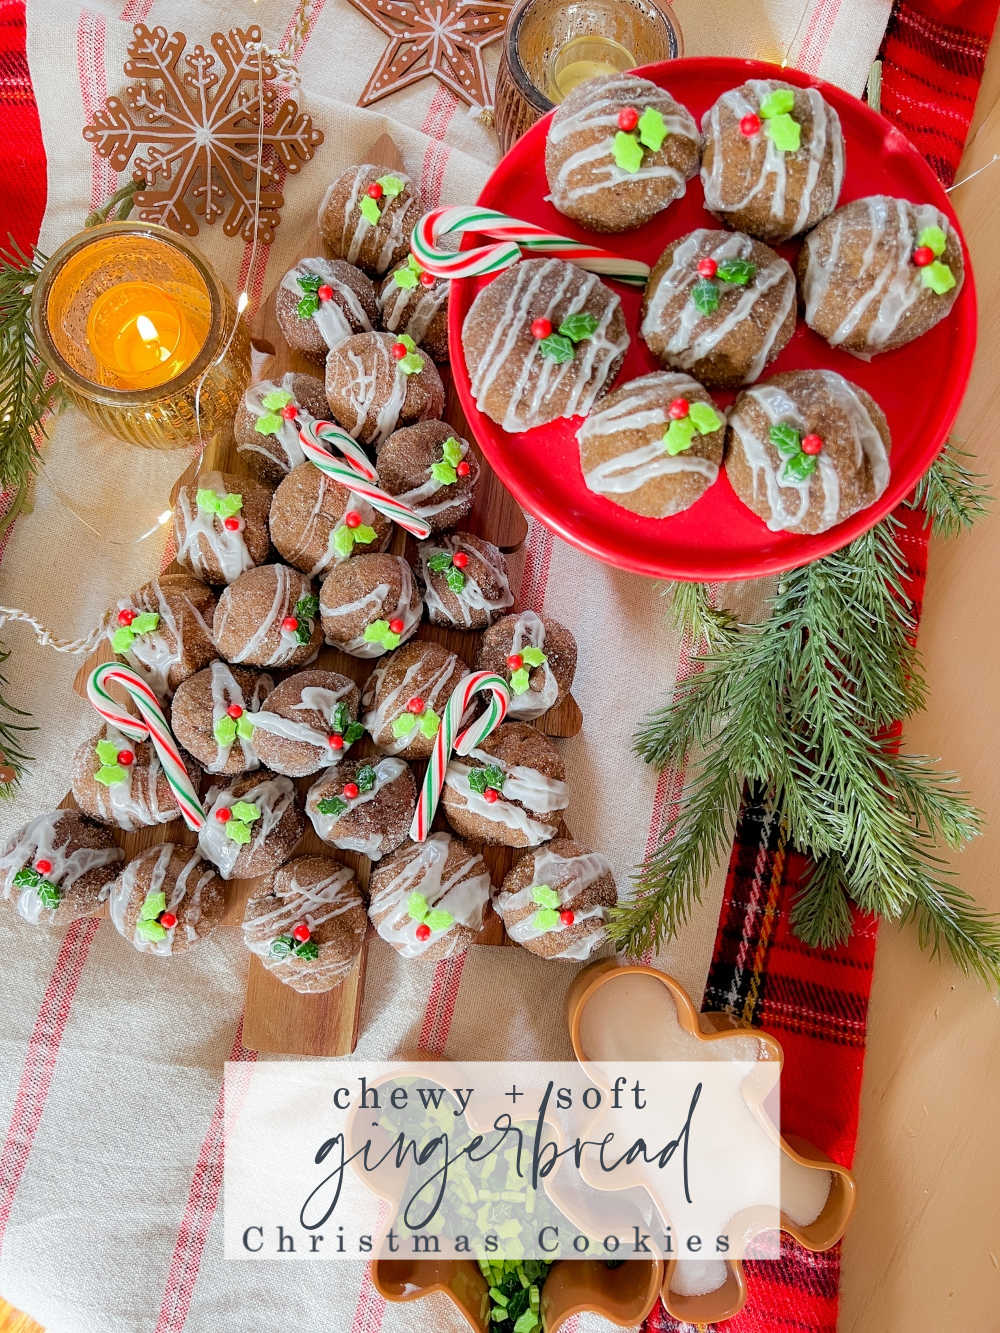 Chewy Soft Christmas Gingerbread Cookies. Bake up holiday joy with my Chewy Soft Christmas Gingerbread Cookies—perfect for exchanges, staying soft, and easy make-ahead.